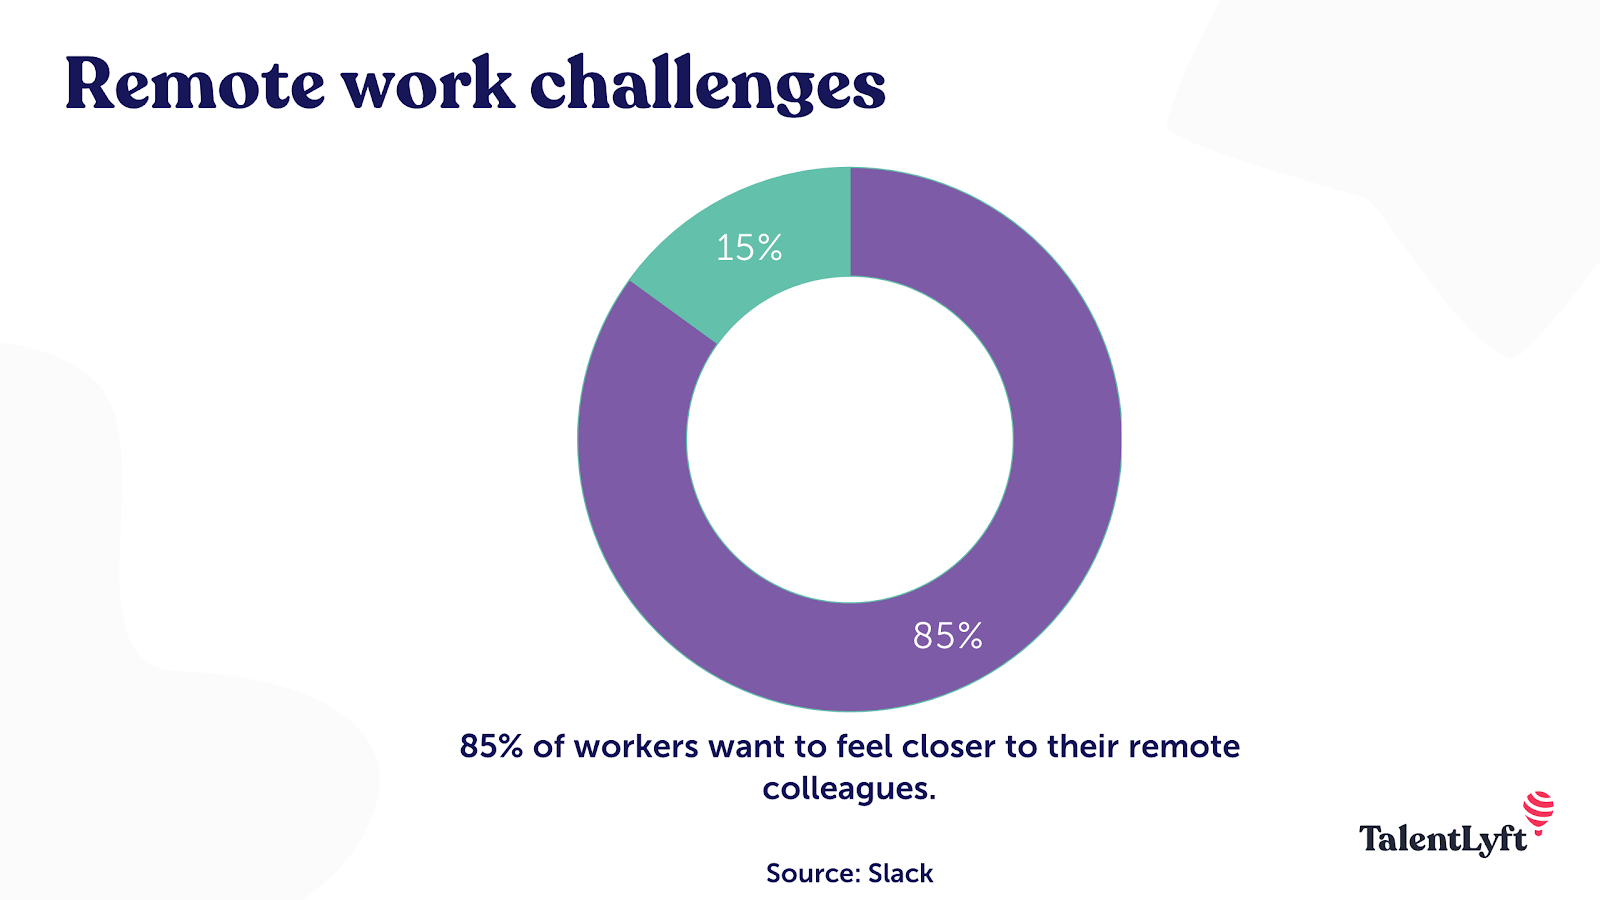 Remote work challenges and opportunities